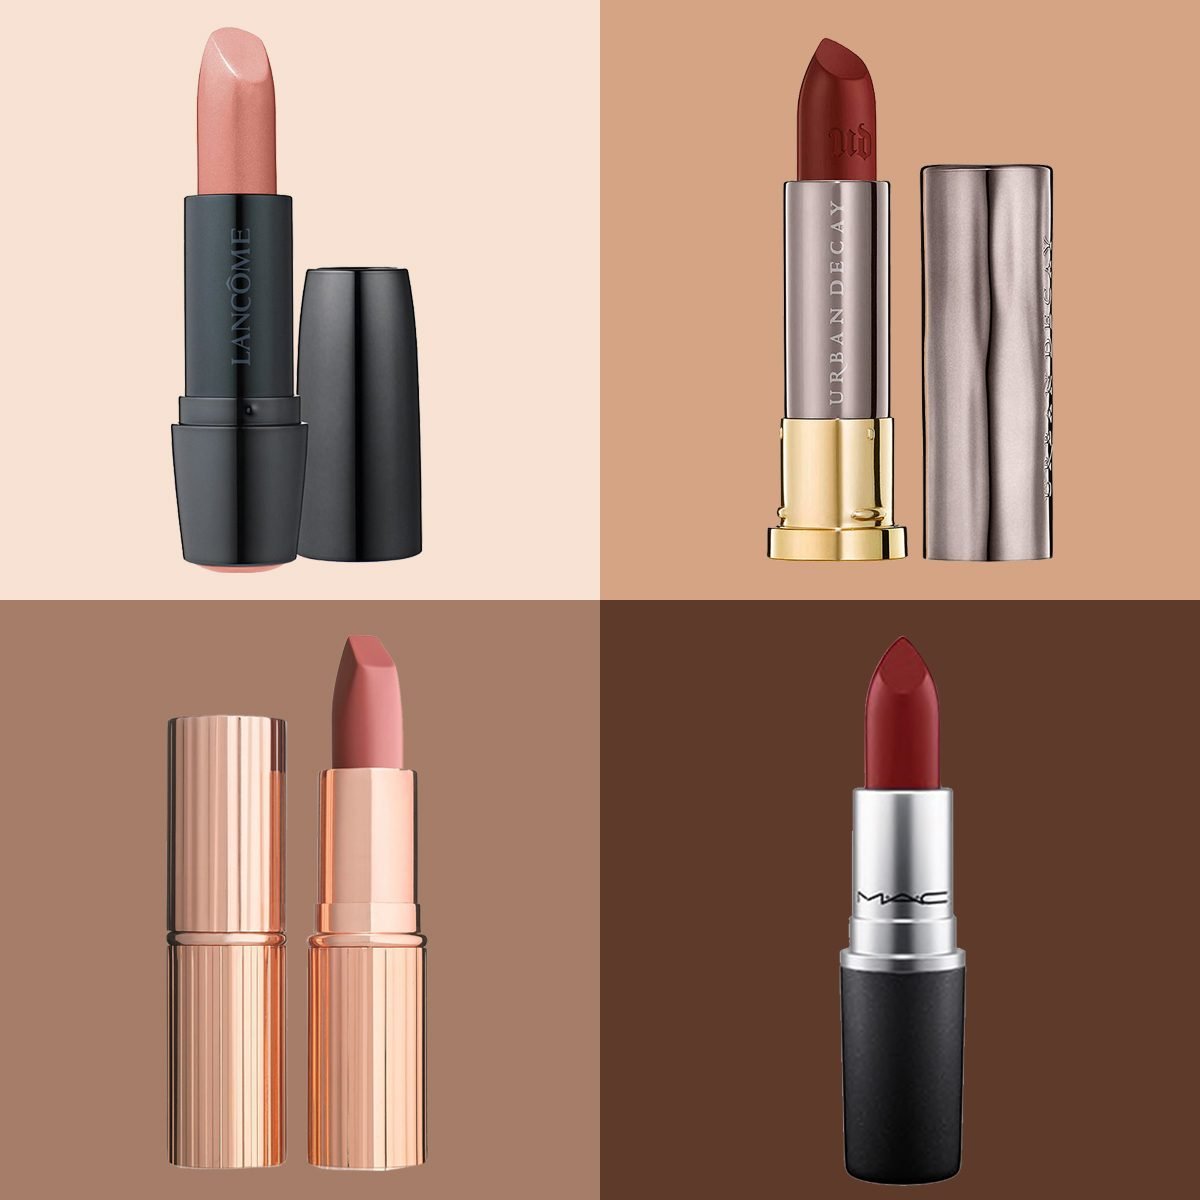 Lille bitte Displacement usund The Best Lipstick for Your Skin Tone | Reader's Digest